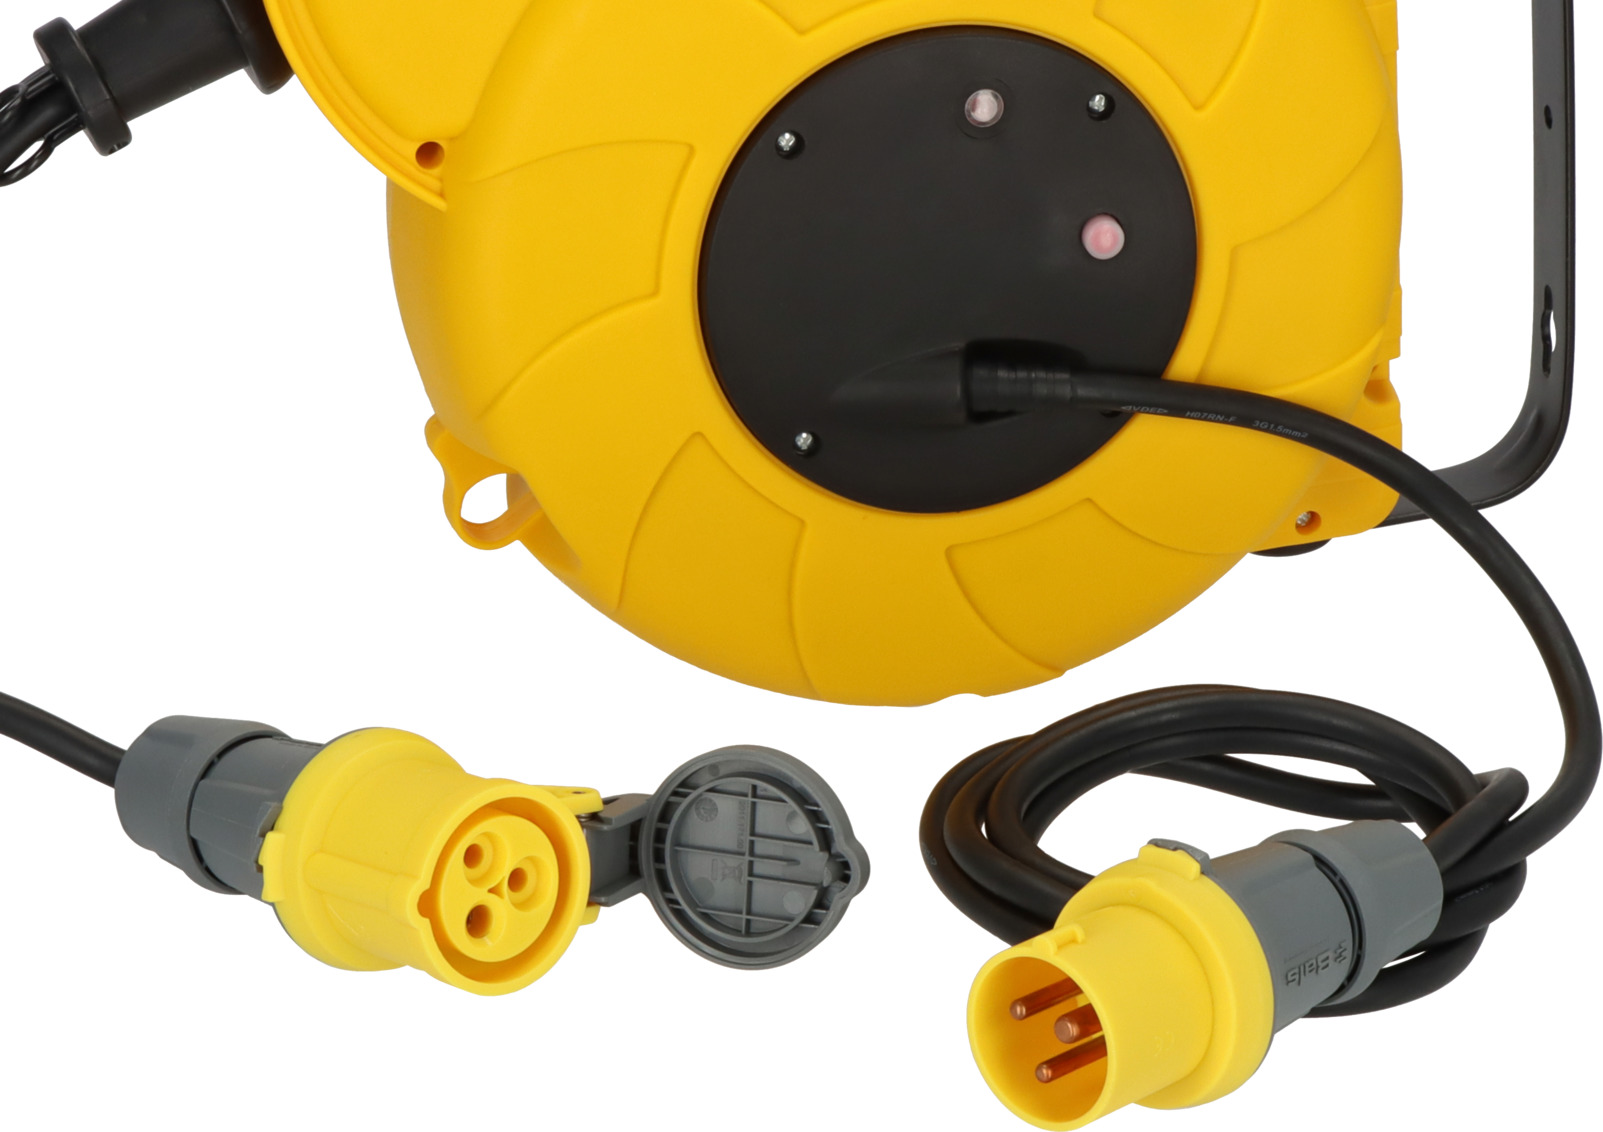  HONDERSON 30 Ft Retractable Extension Cord Reel with 3  Electrical Power Outlets - 16/3 SJTW Power Cord,10 AMP Circuit Breaker -  Ceiling or Wall Mount for Garage,UL Listed,Yellow : Tools & Home Improvement